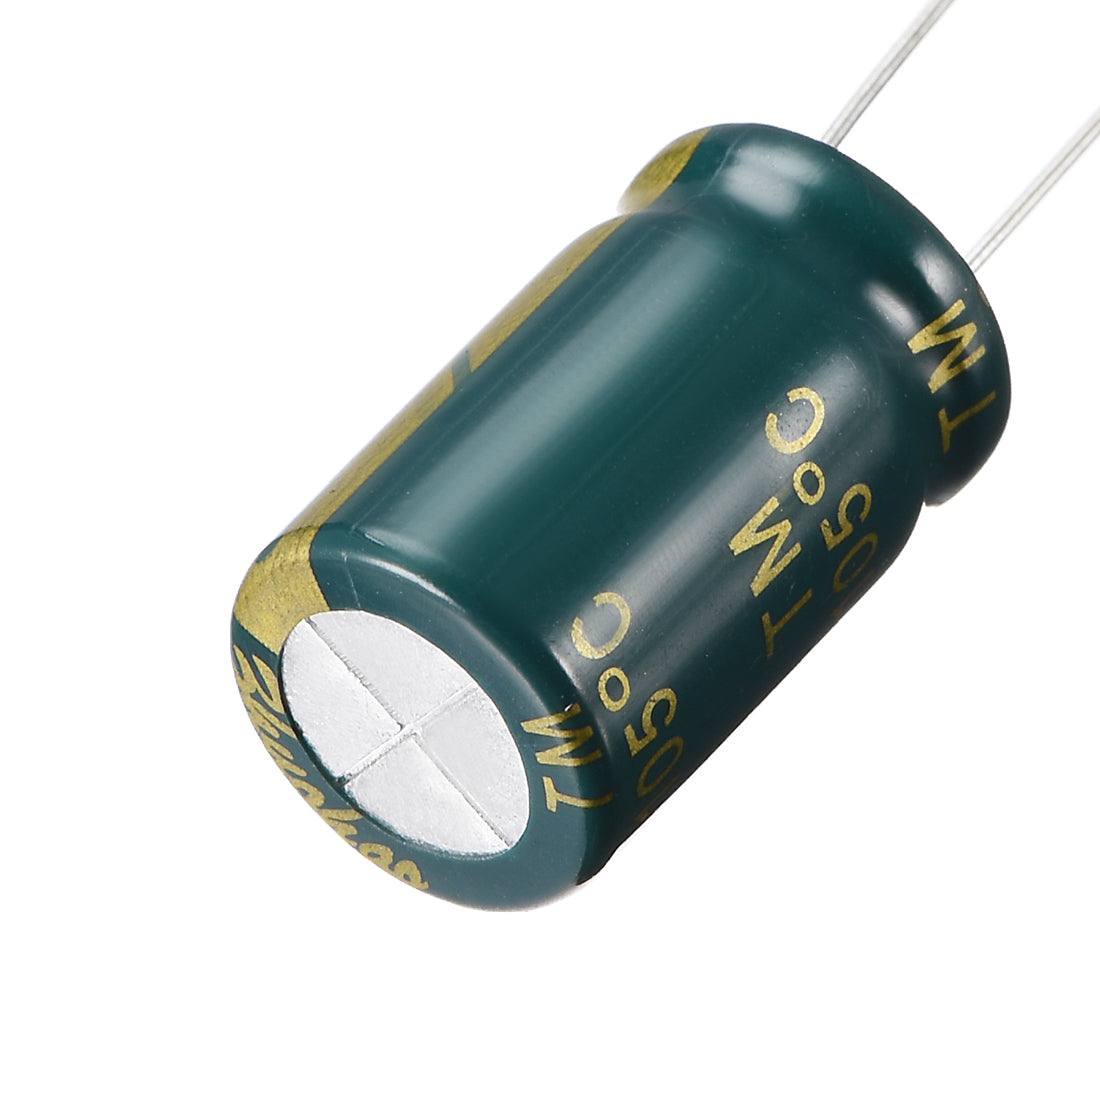 uxcell Uxcell Aluminum Radial Electrolytic Capacitor Low ESR Green with 2200UF 25V 105 Celsius Life 3000H 13 x21 mm High Ripple Current,Low Impedance 10pcs